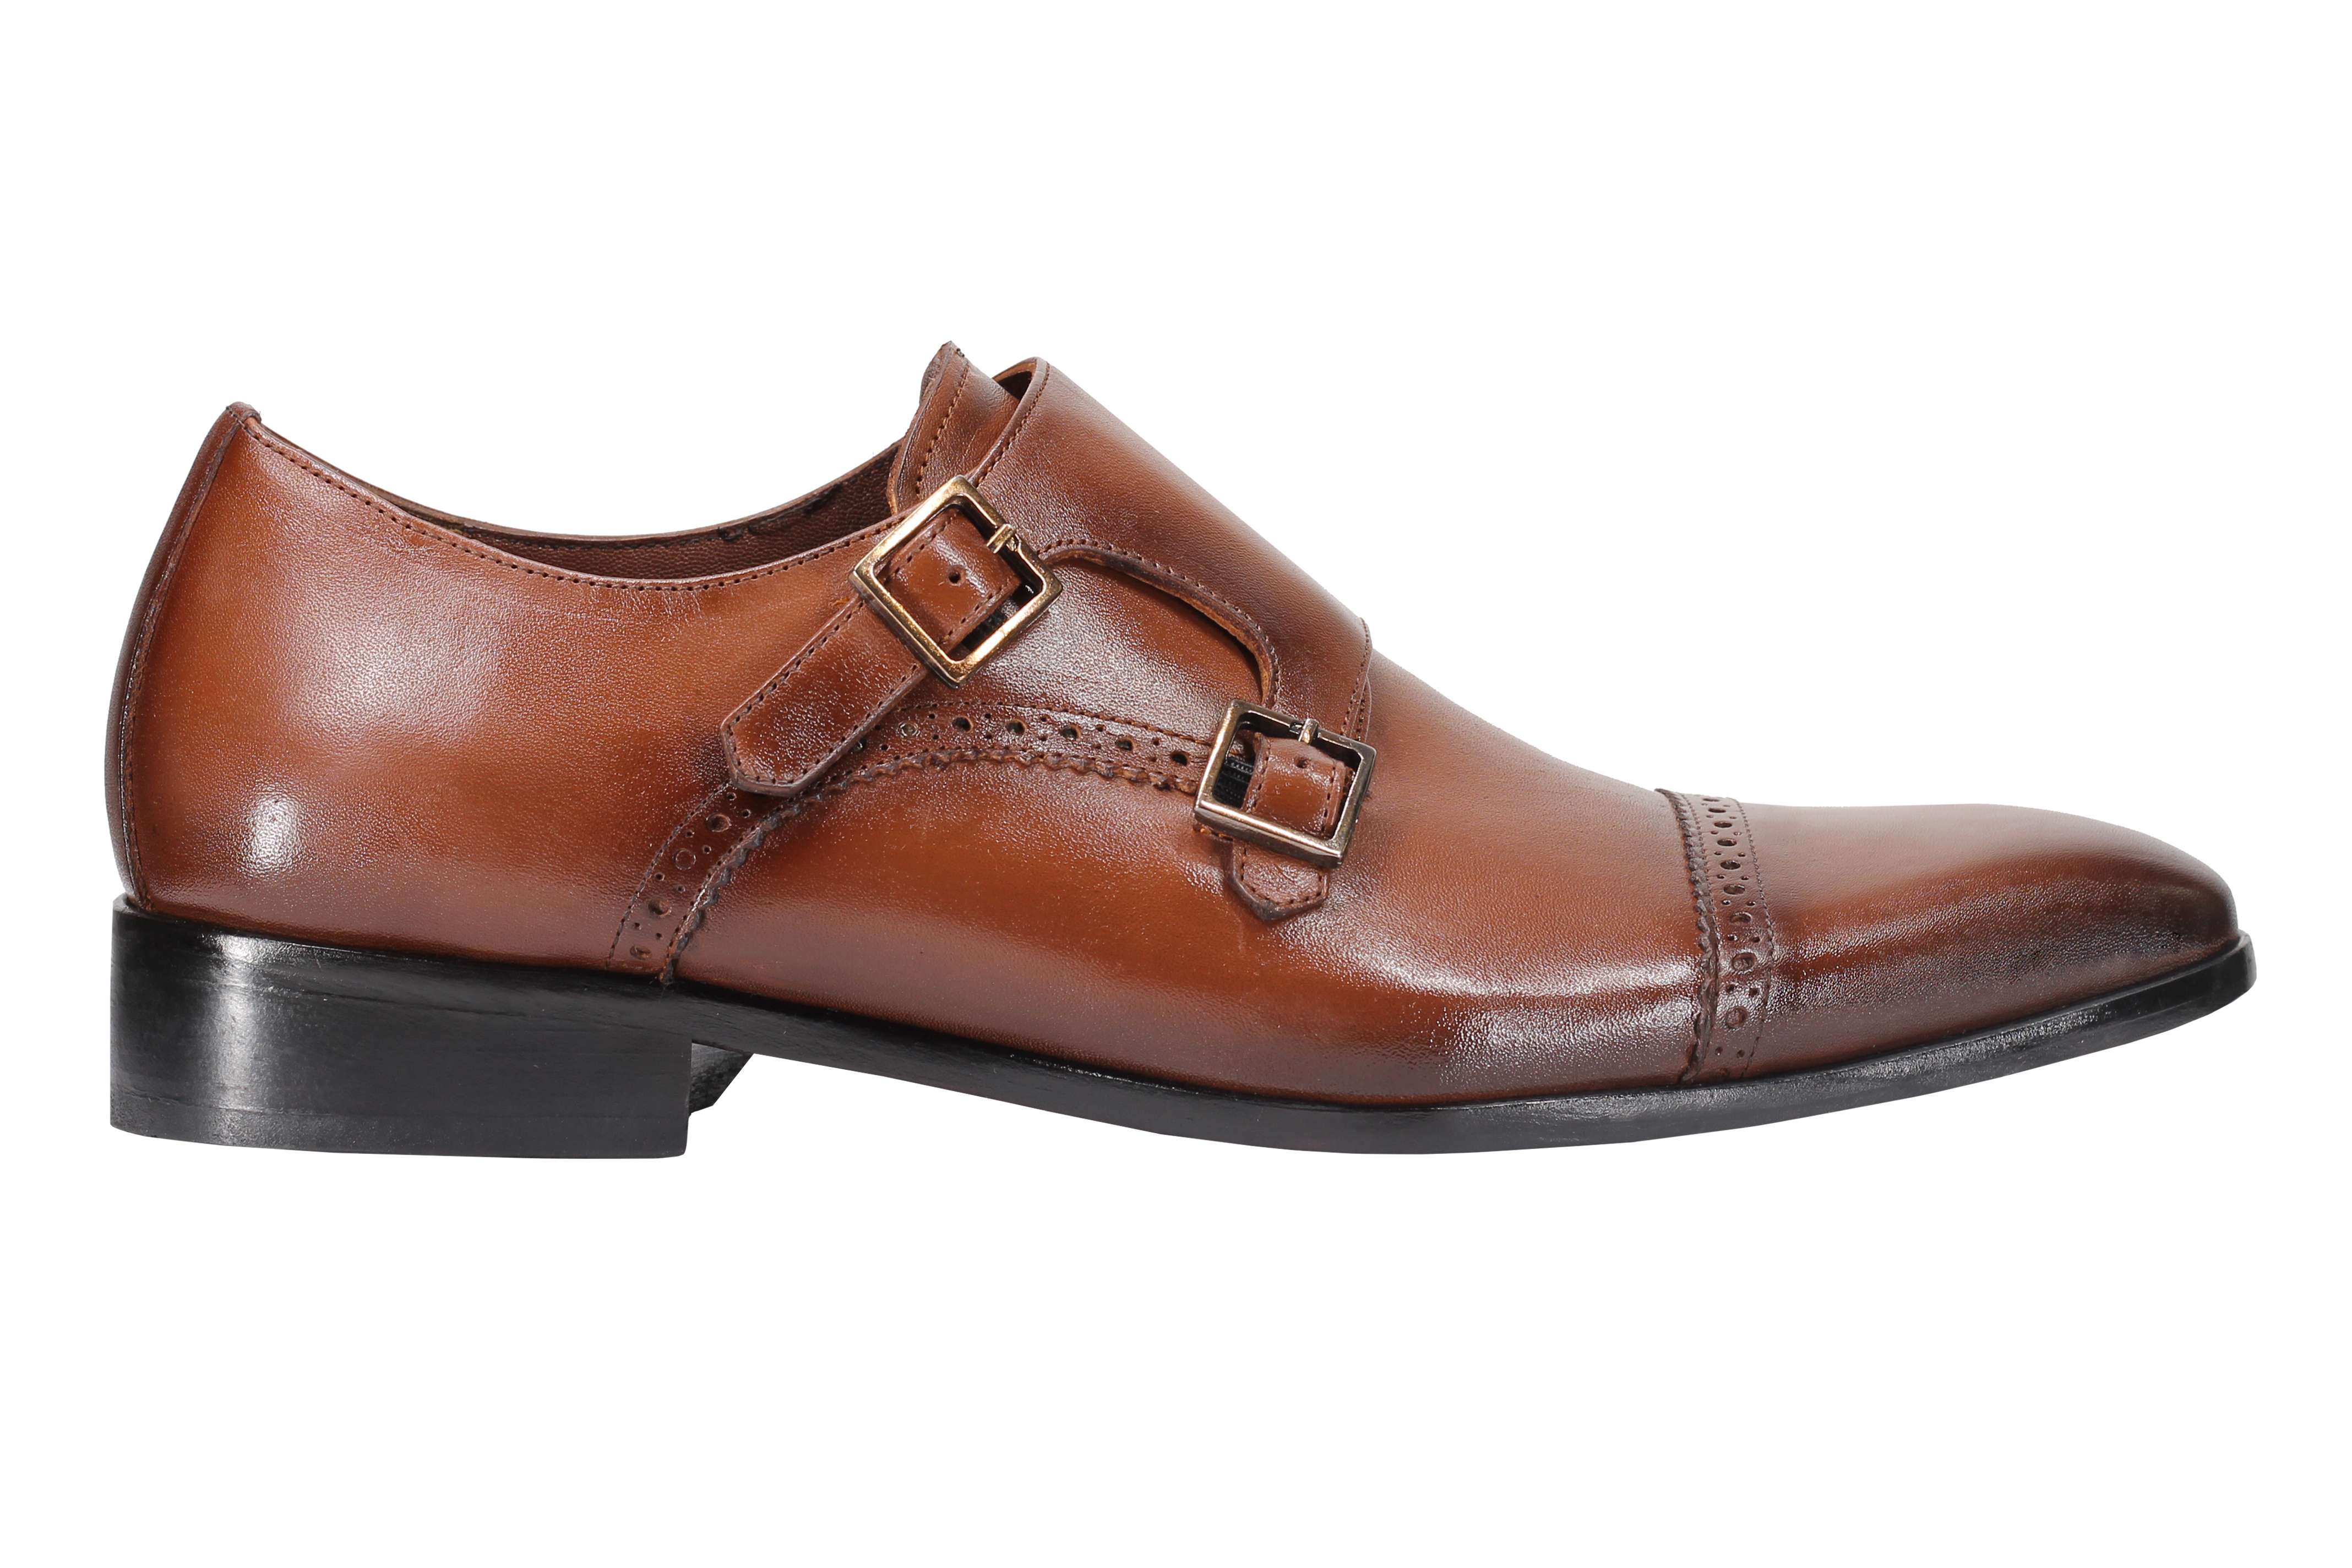 BROWN CALF LEATHER SEMI BROGUE MONK SHOES